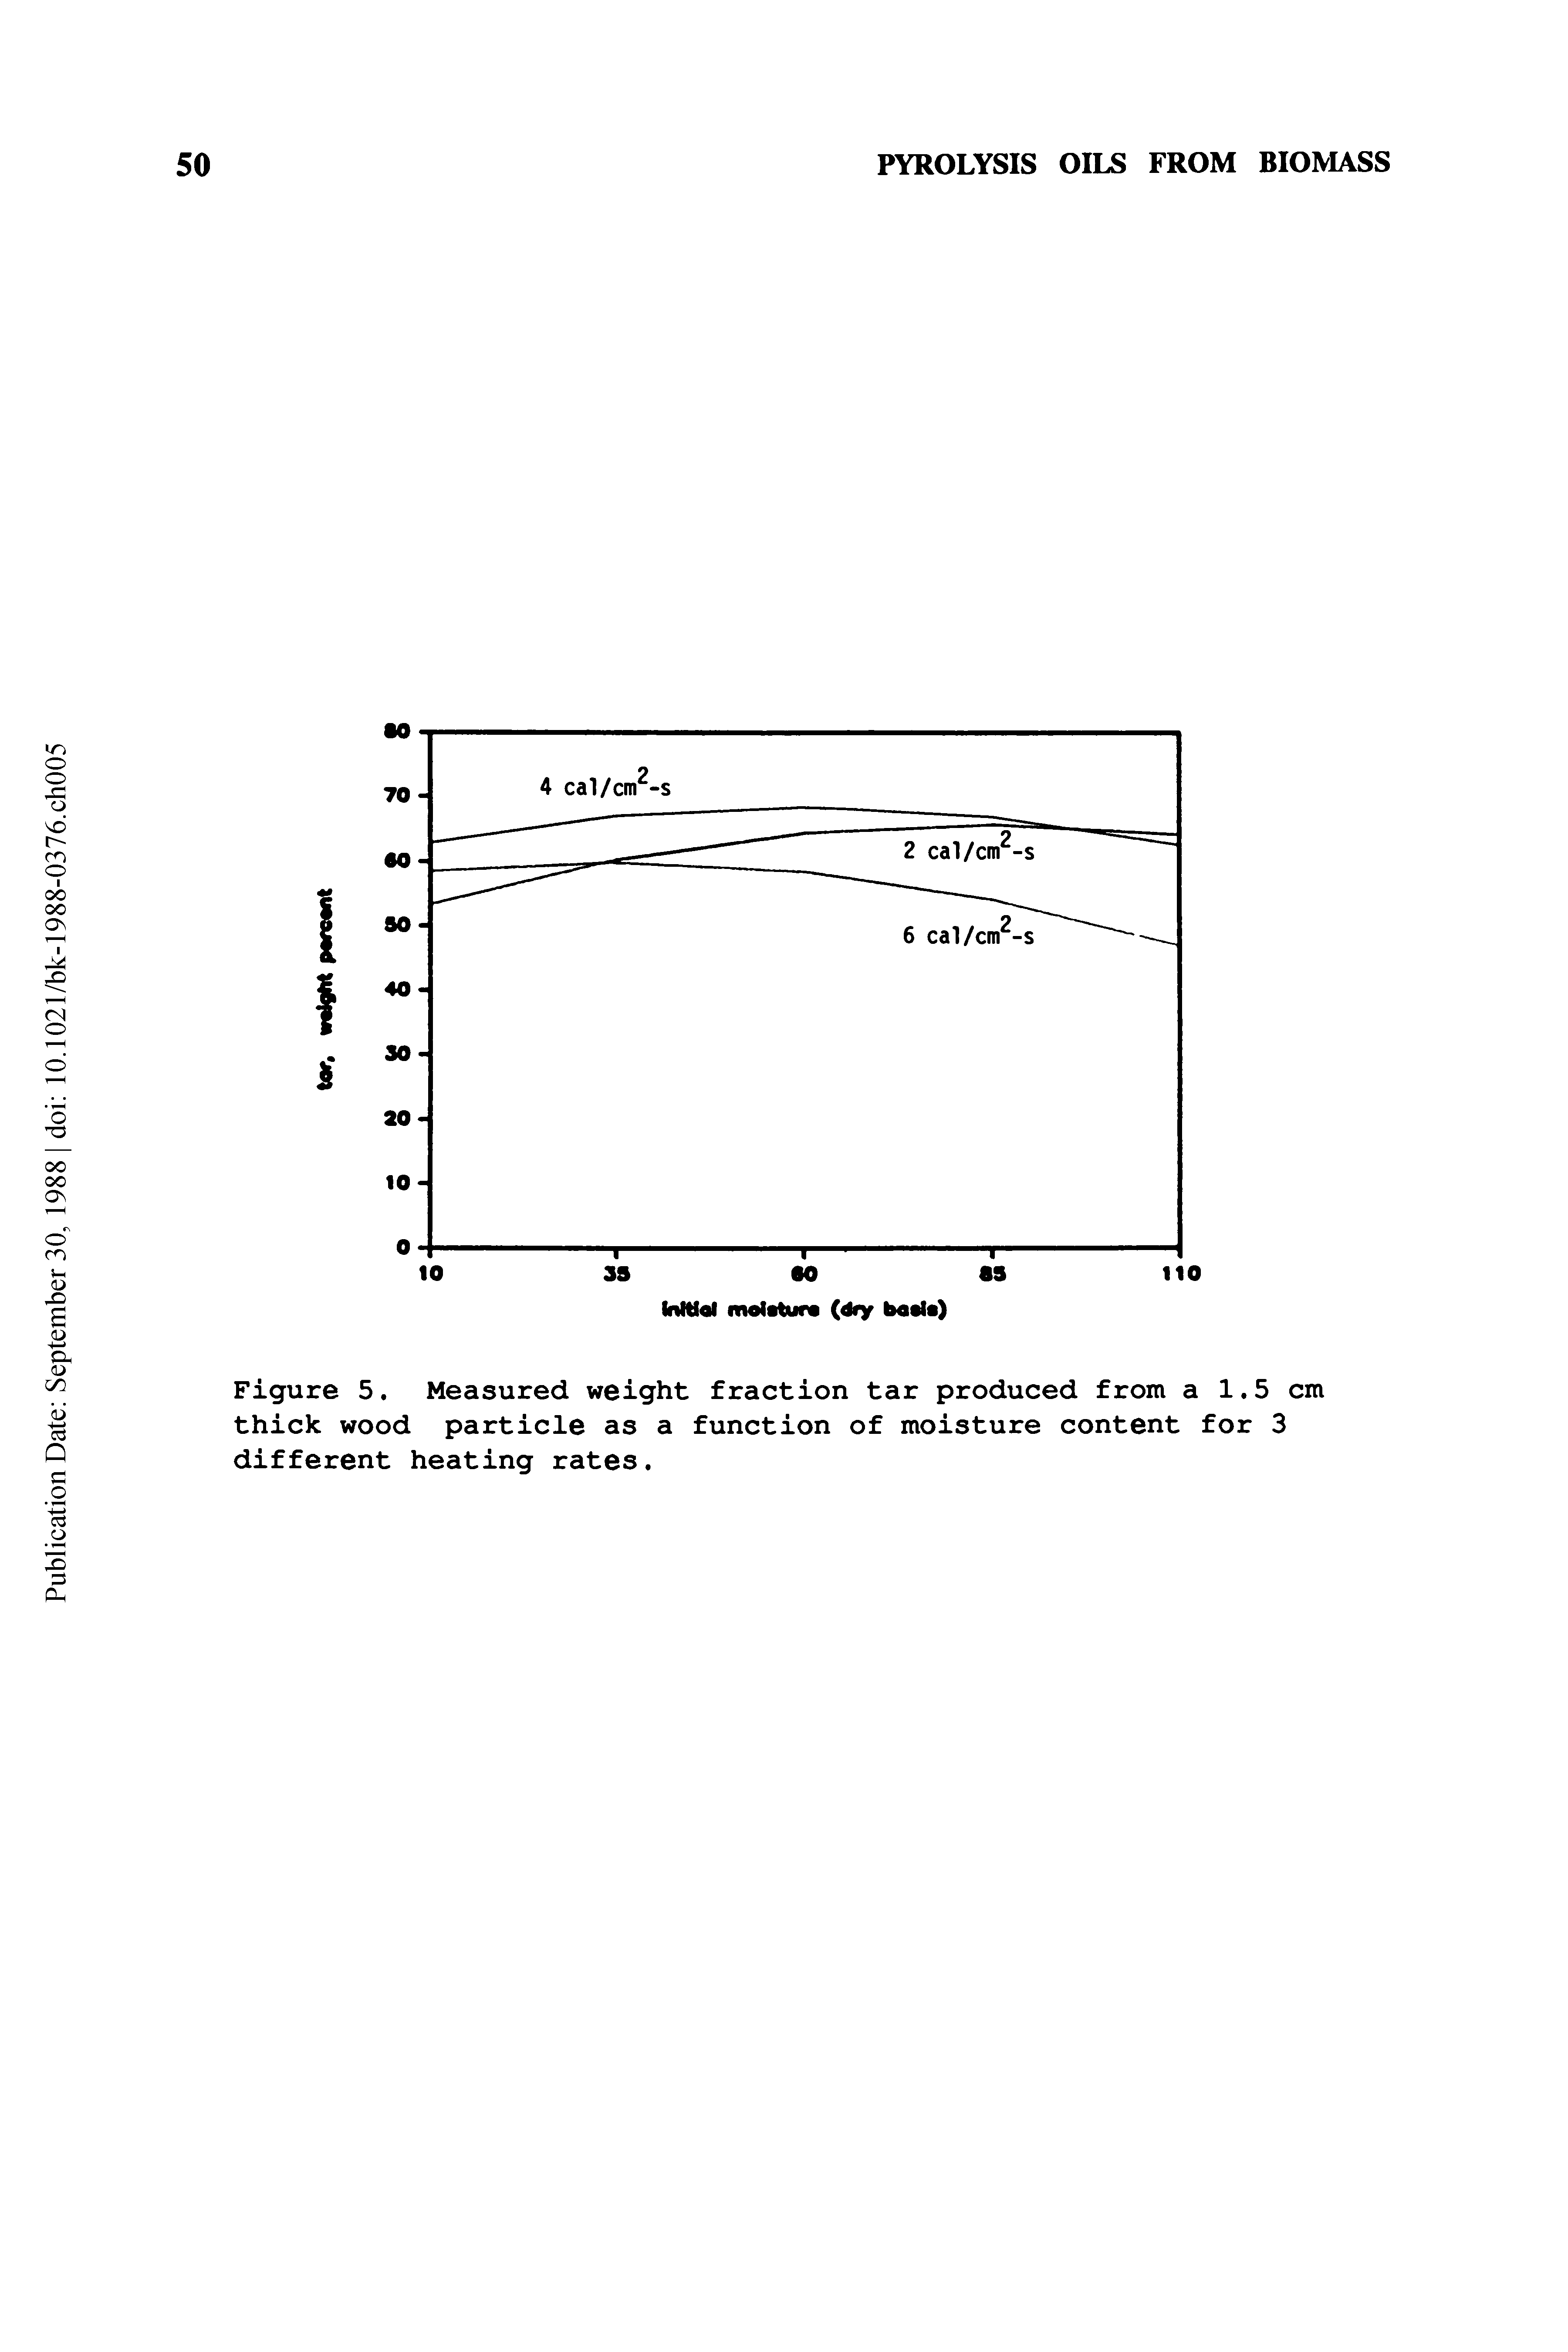 Figure 5. Measured weight fraction tar produced from a 1.5 cm thick wood particle as a function of moisture content for 3 different heating rates.